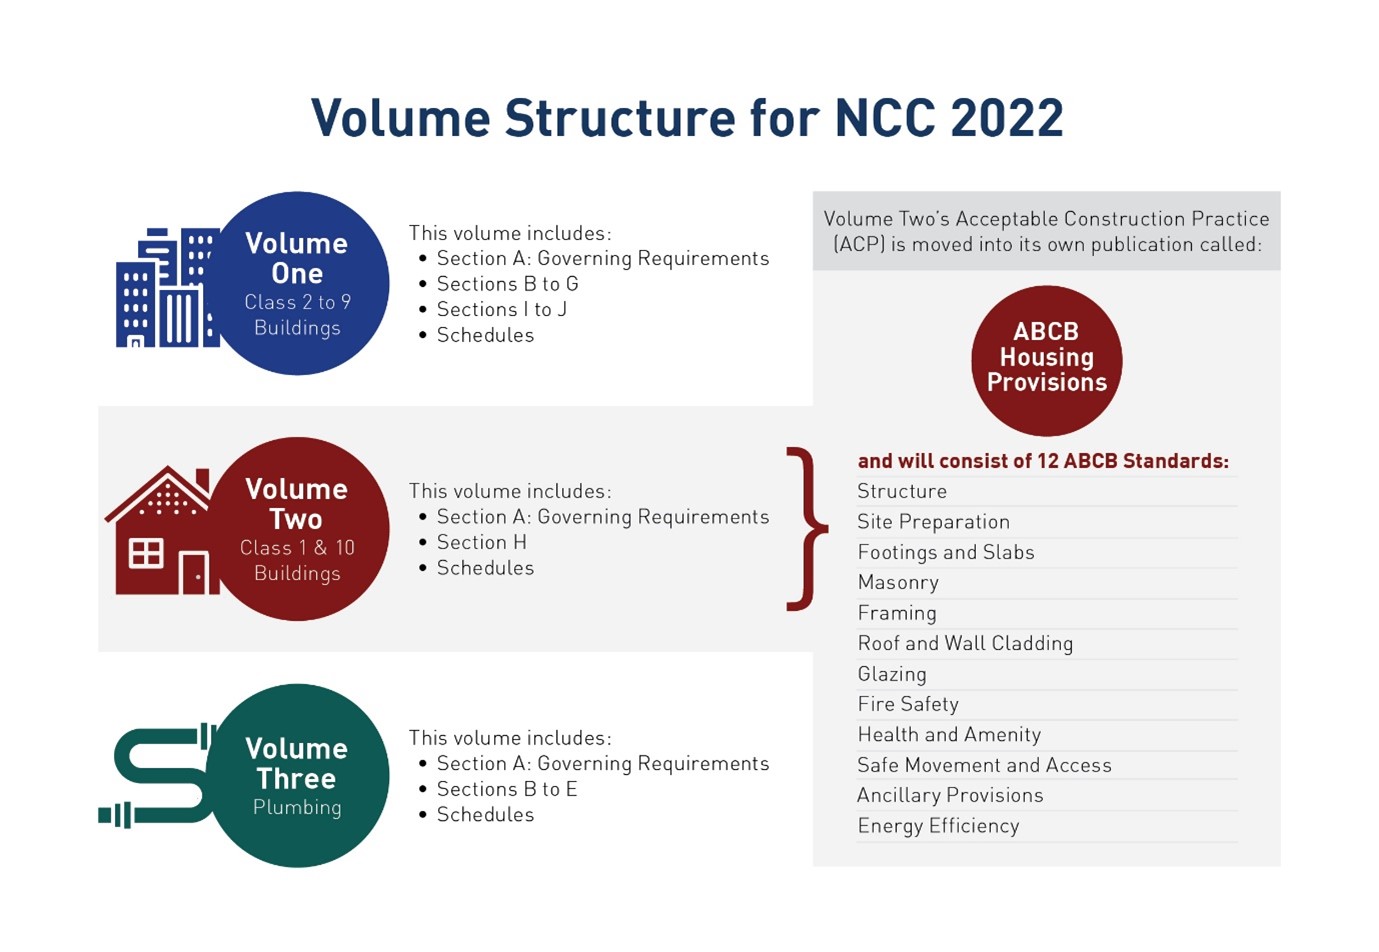 A new volume structure for National Construction Code 2022